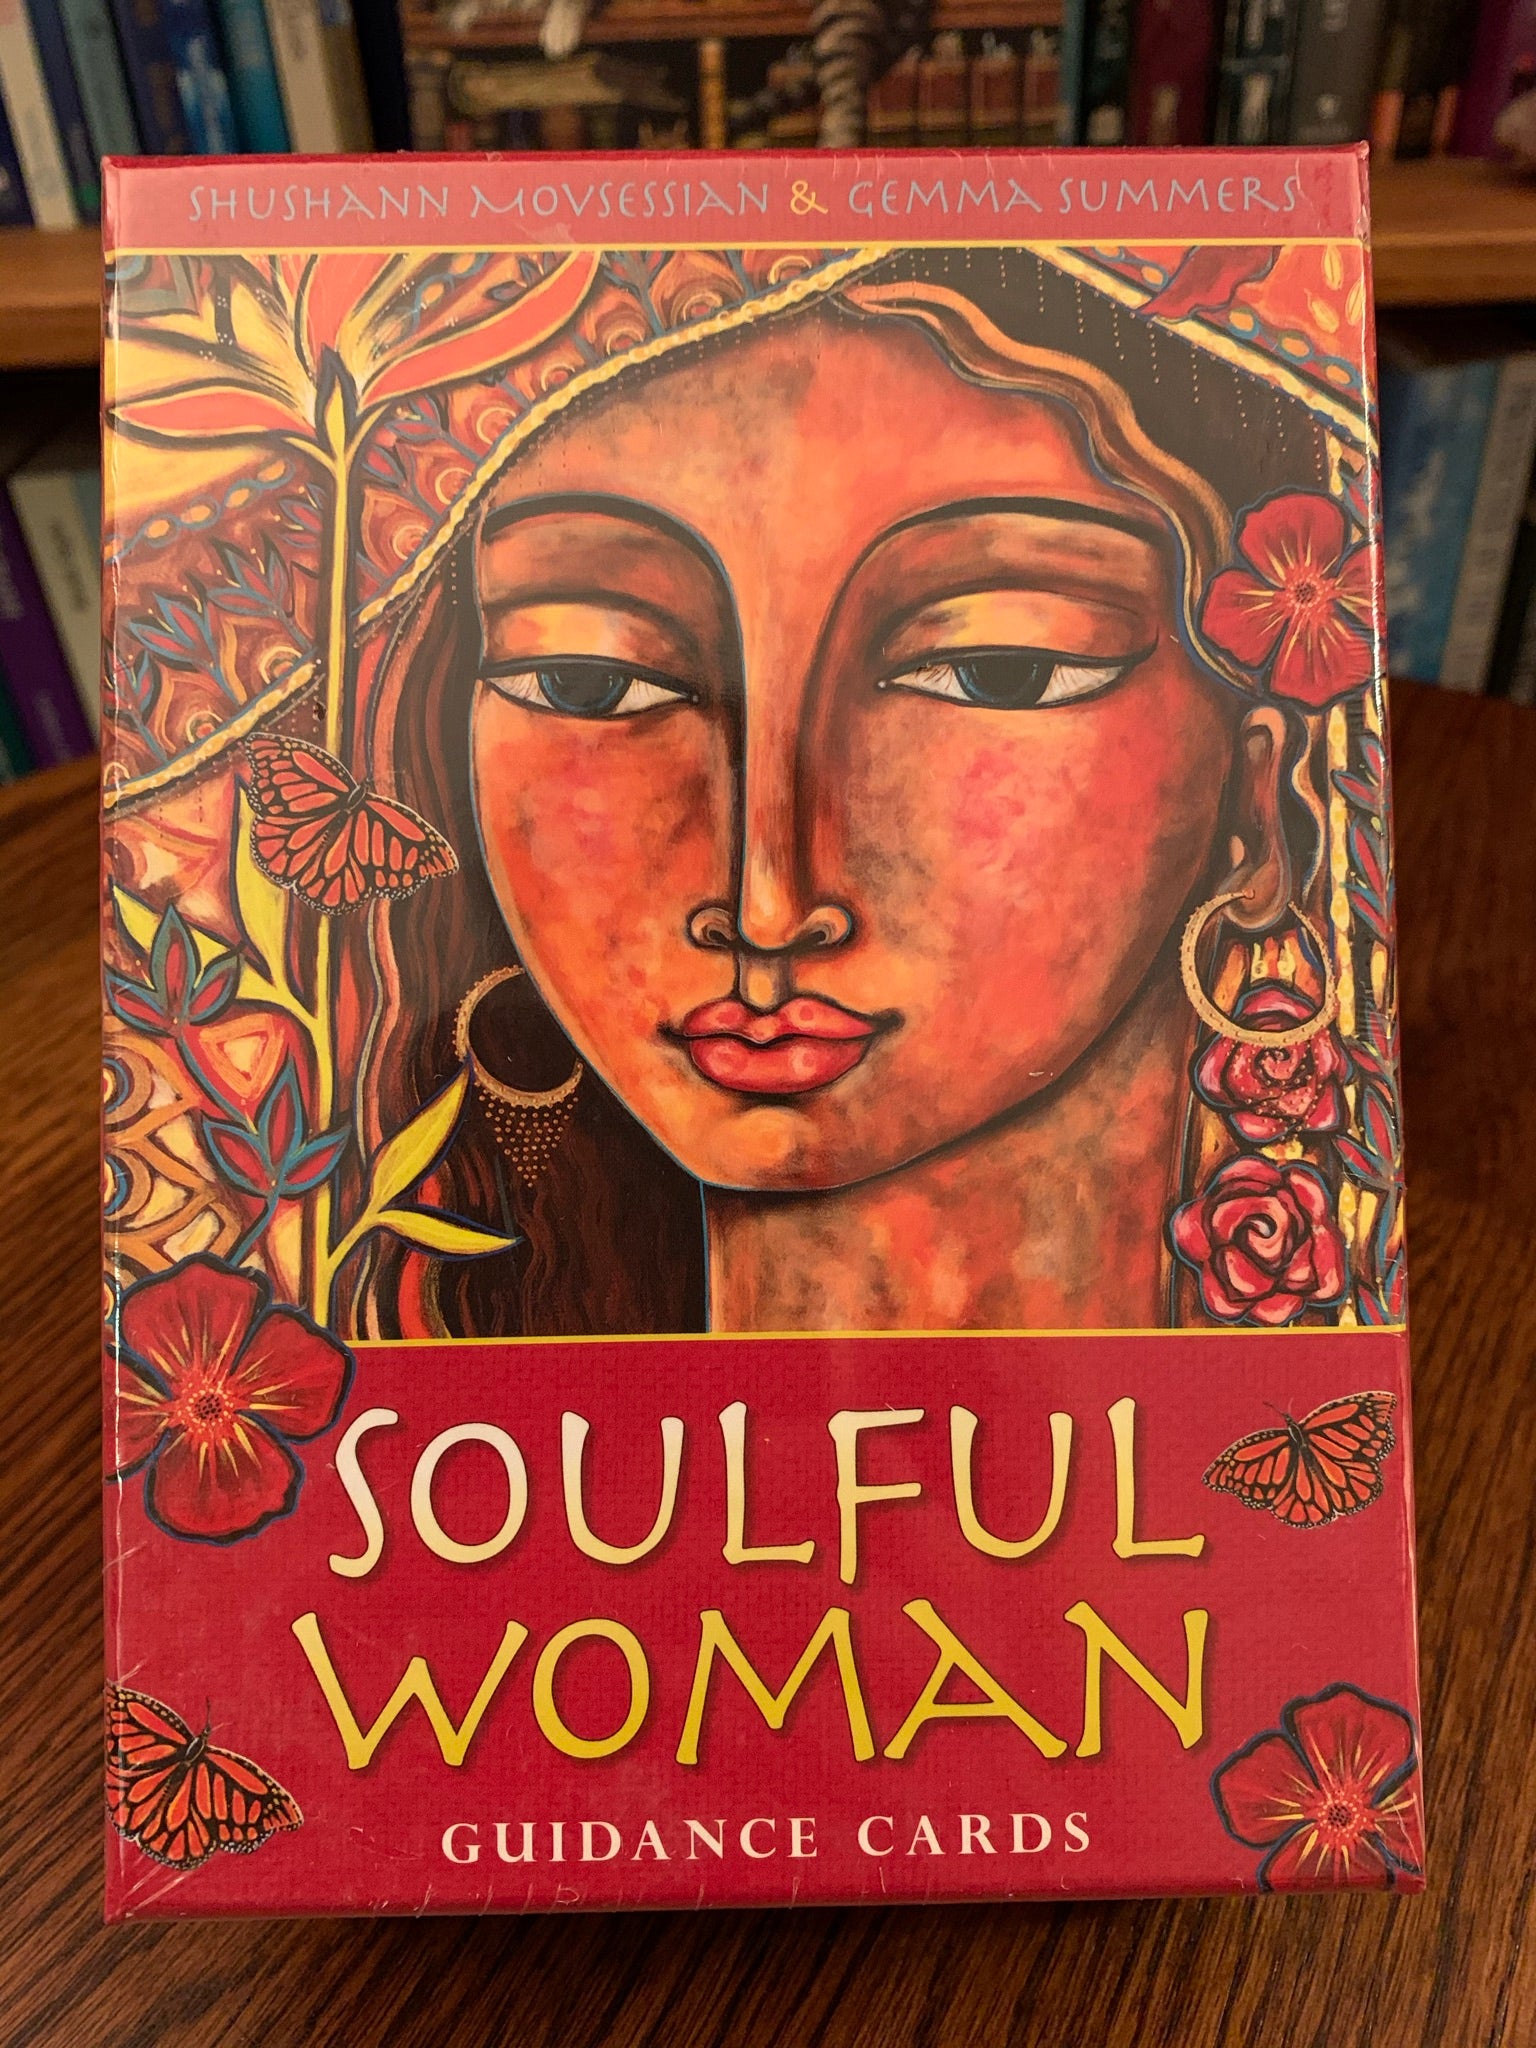 The Soulful Woman Guidance Cards are empowering, nourishing, validating and inspiring. The deck was created by Shushann Movsessian and Gemma Summers, who handpicked 26 visionary female artists to illustrate the cards. And so this deck is for women and by women who are creative, gifted and talented. These cards will "help you to relax into life's flow, trust in divine timing, follow your intuition." Set includes 26 cards, a guidebook & a box to store them. Cost is $23.95.